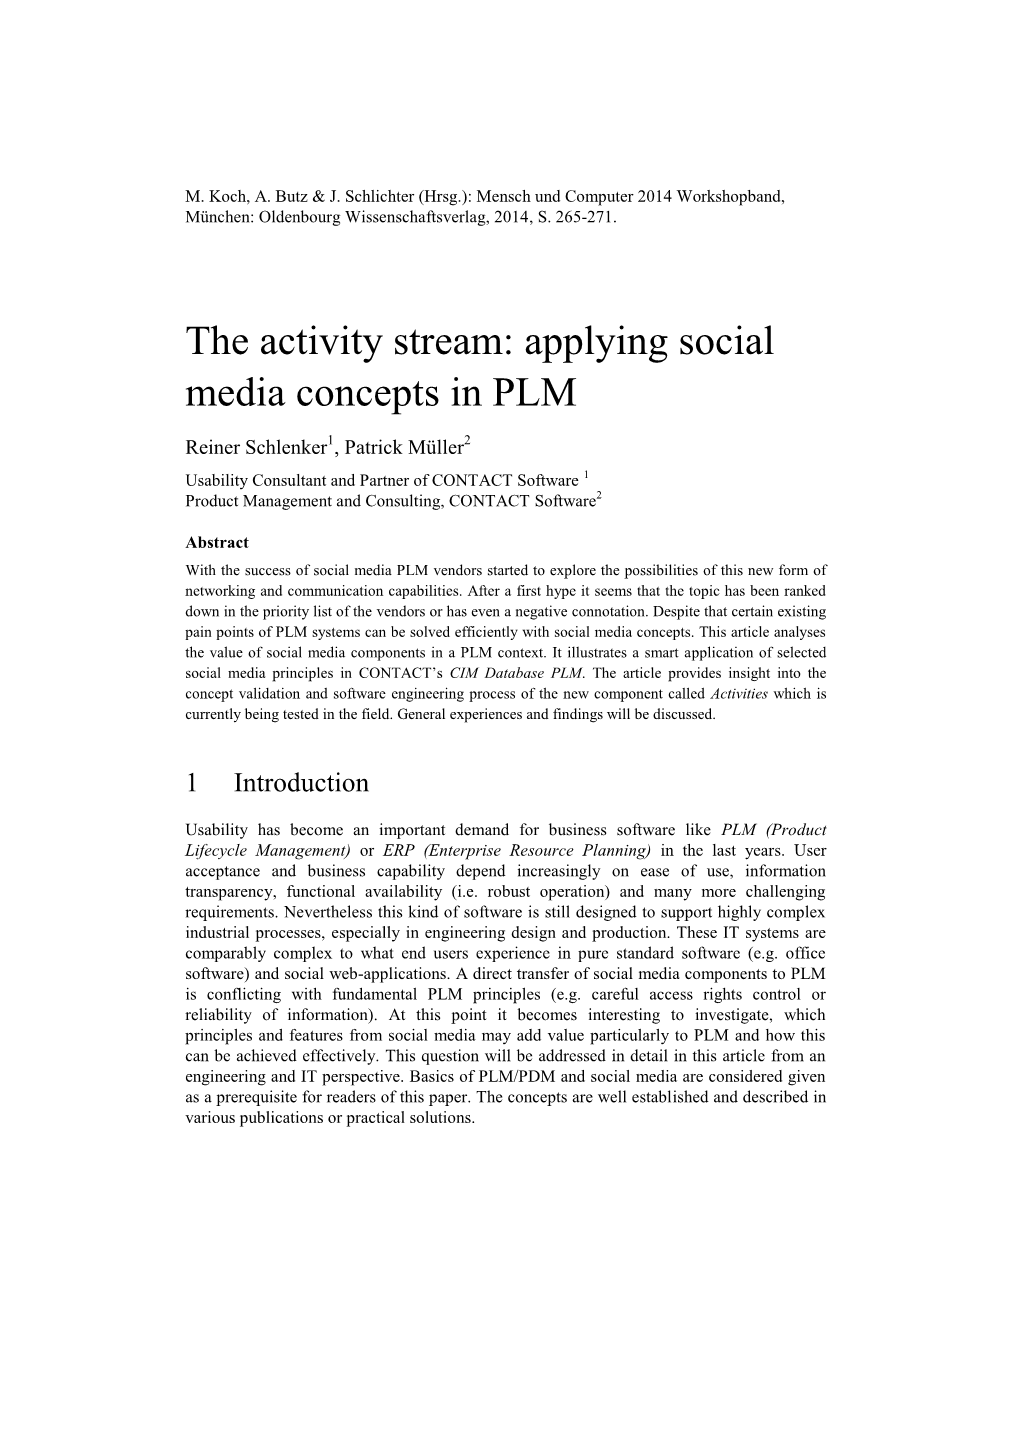 The Activity Stream: Applying Social Media Concepts in PLM